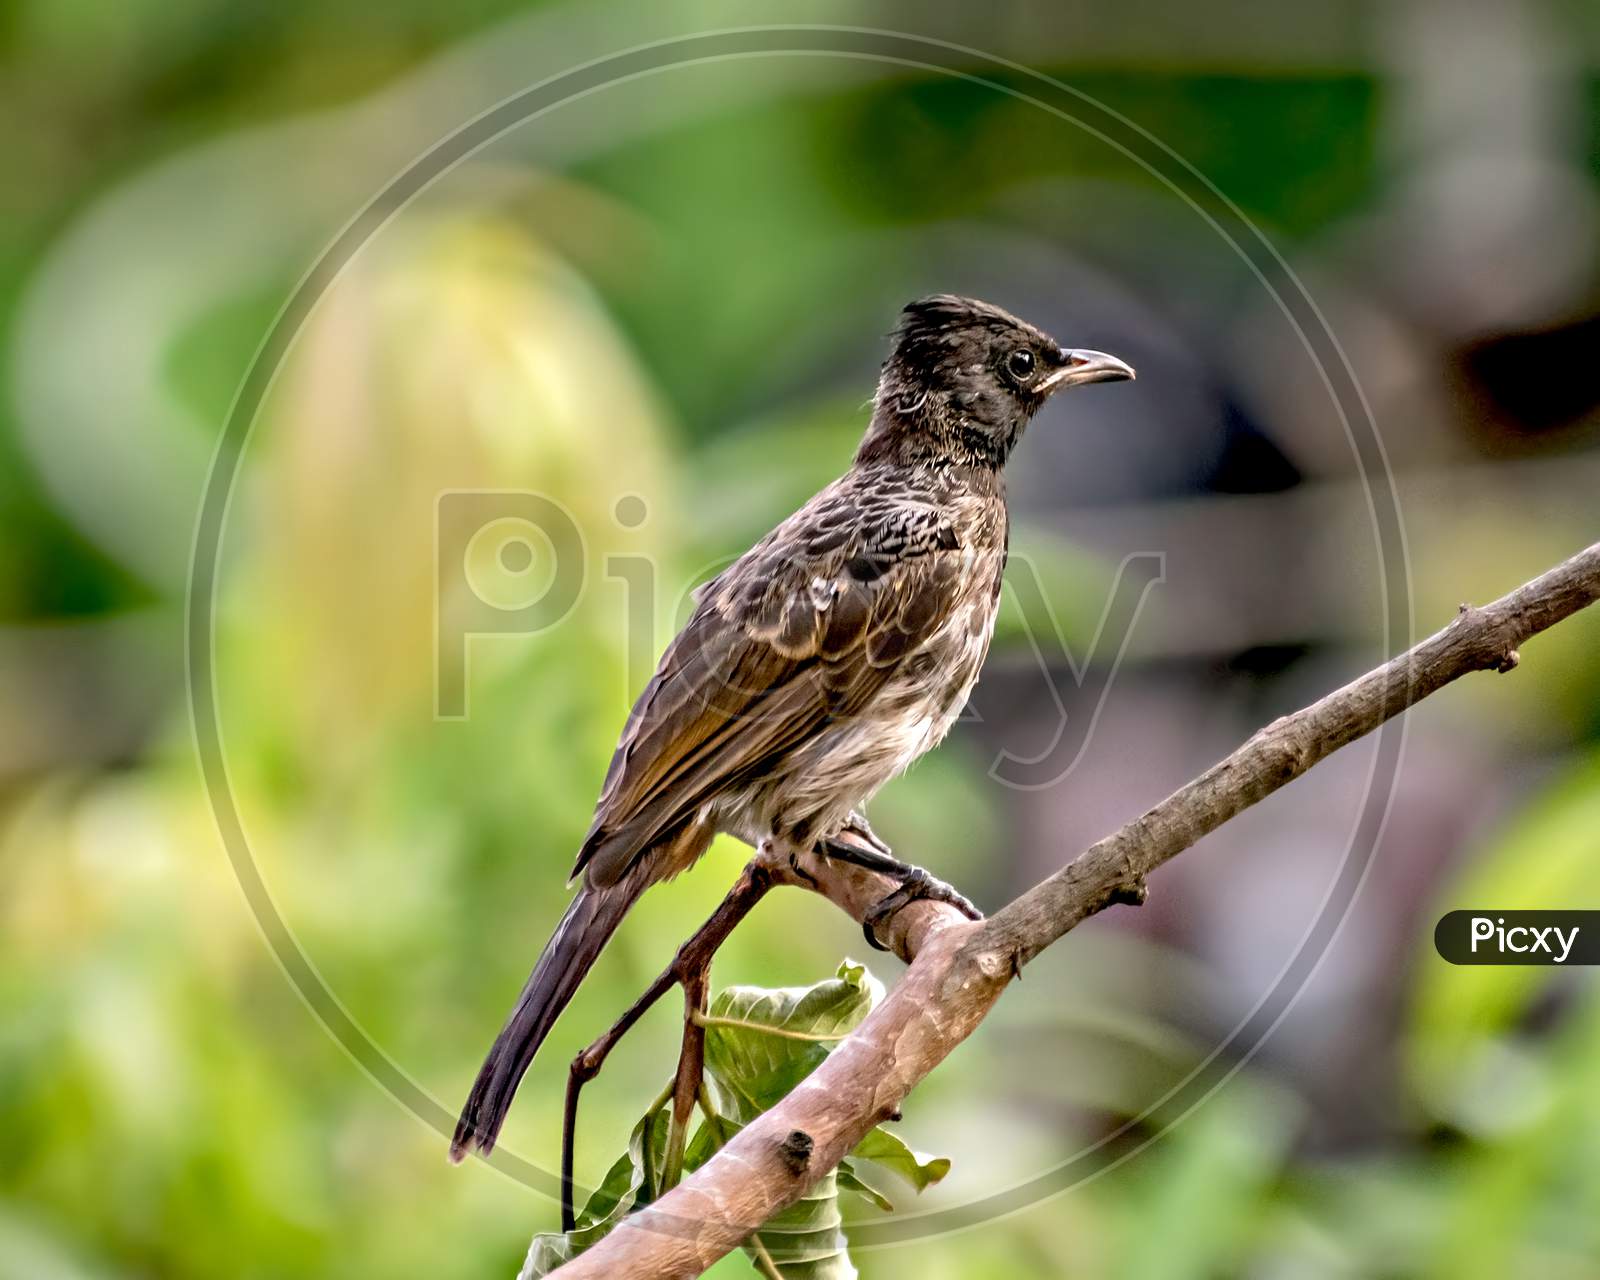 Isolated, Close Up Image Of Red Vented Bulbul Sitting On Dry Tree Branch.